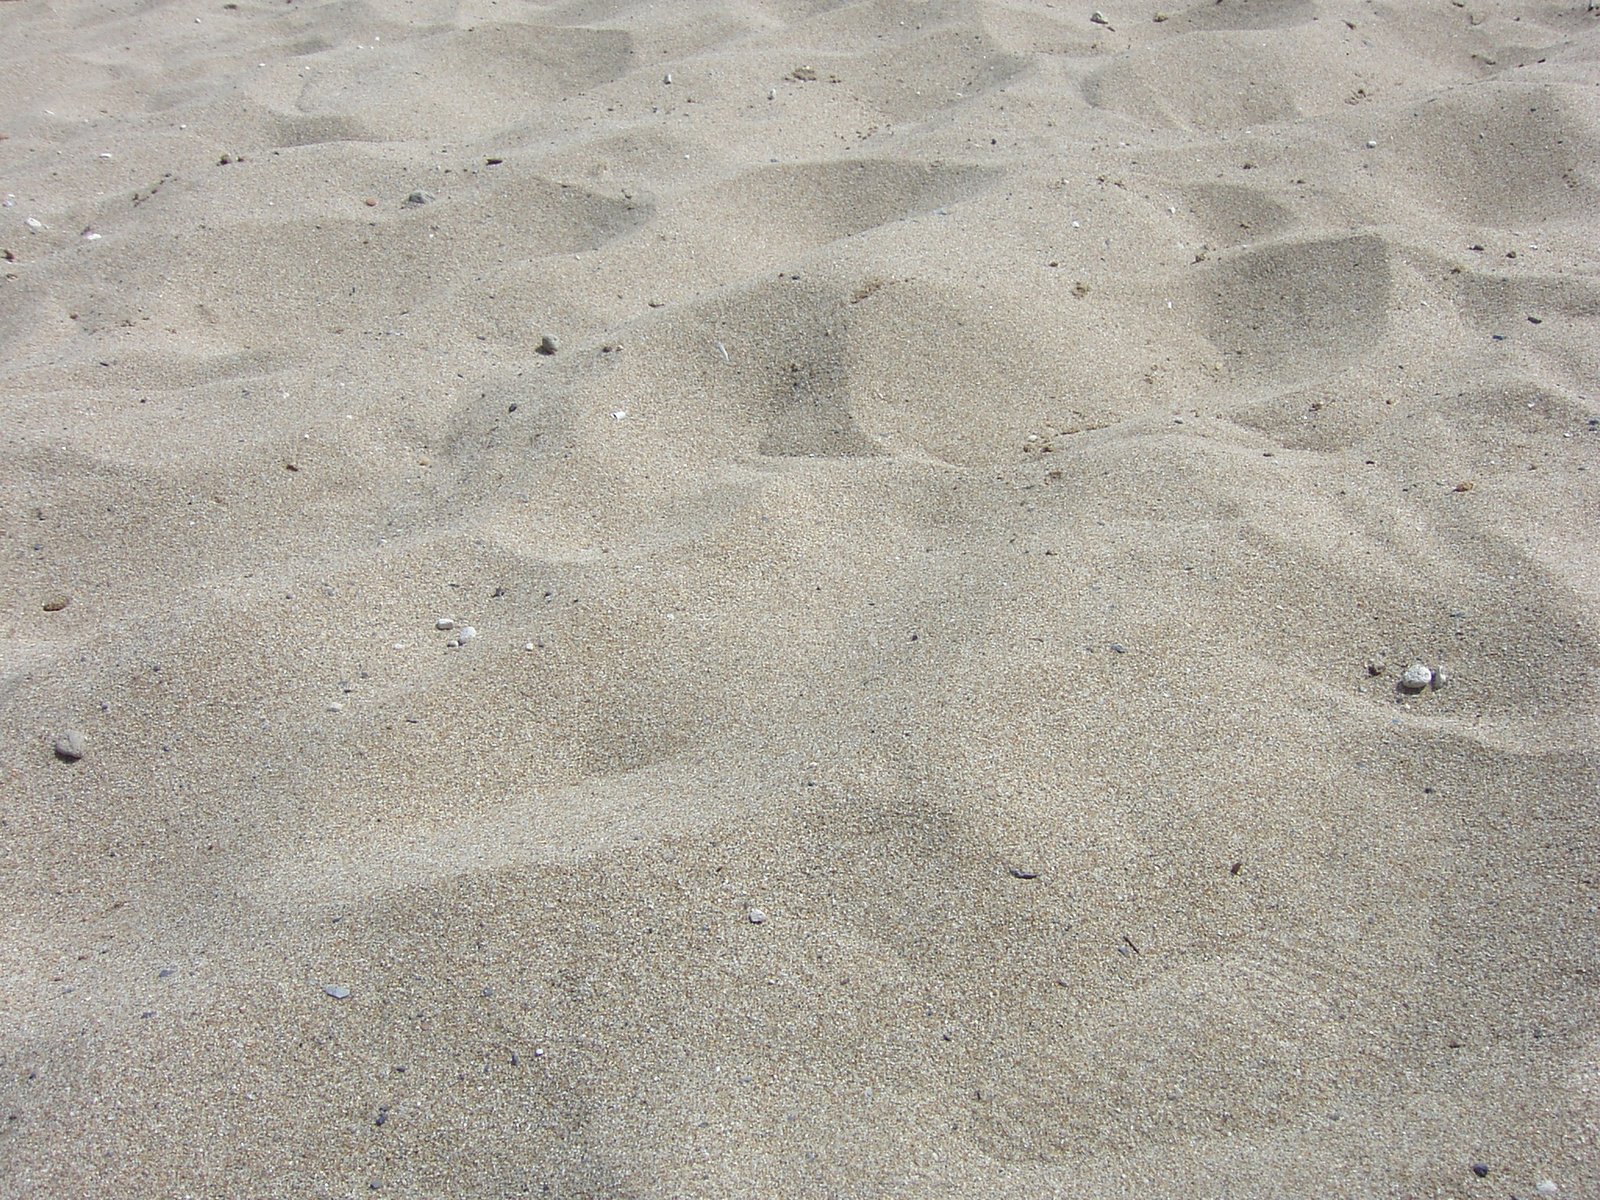 a brown dog is walking across the sand